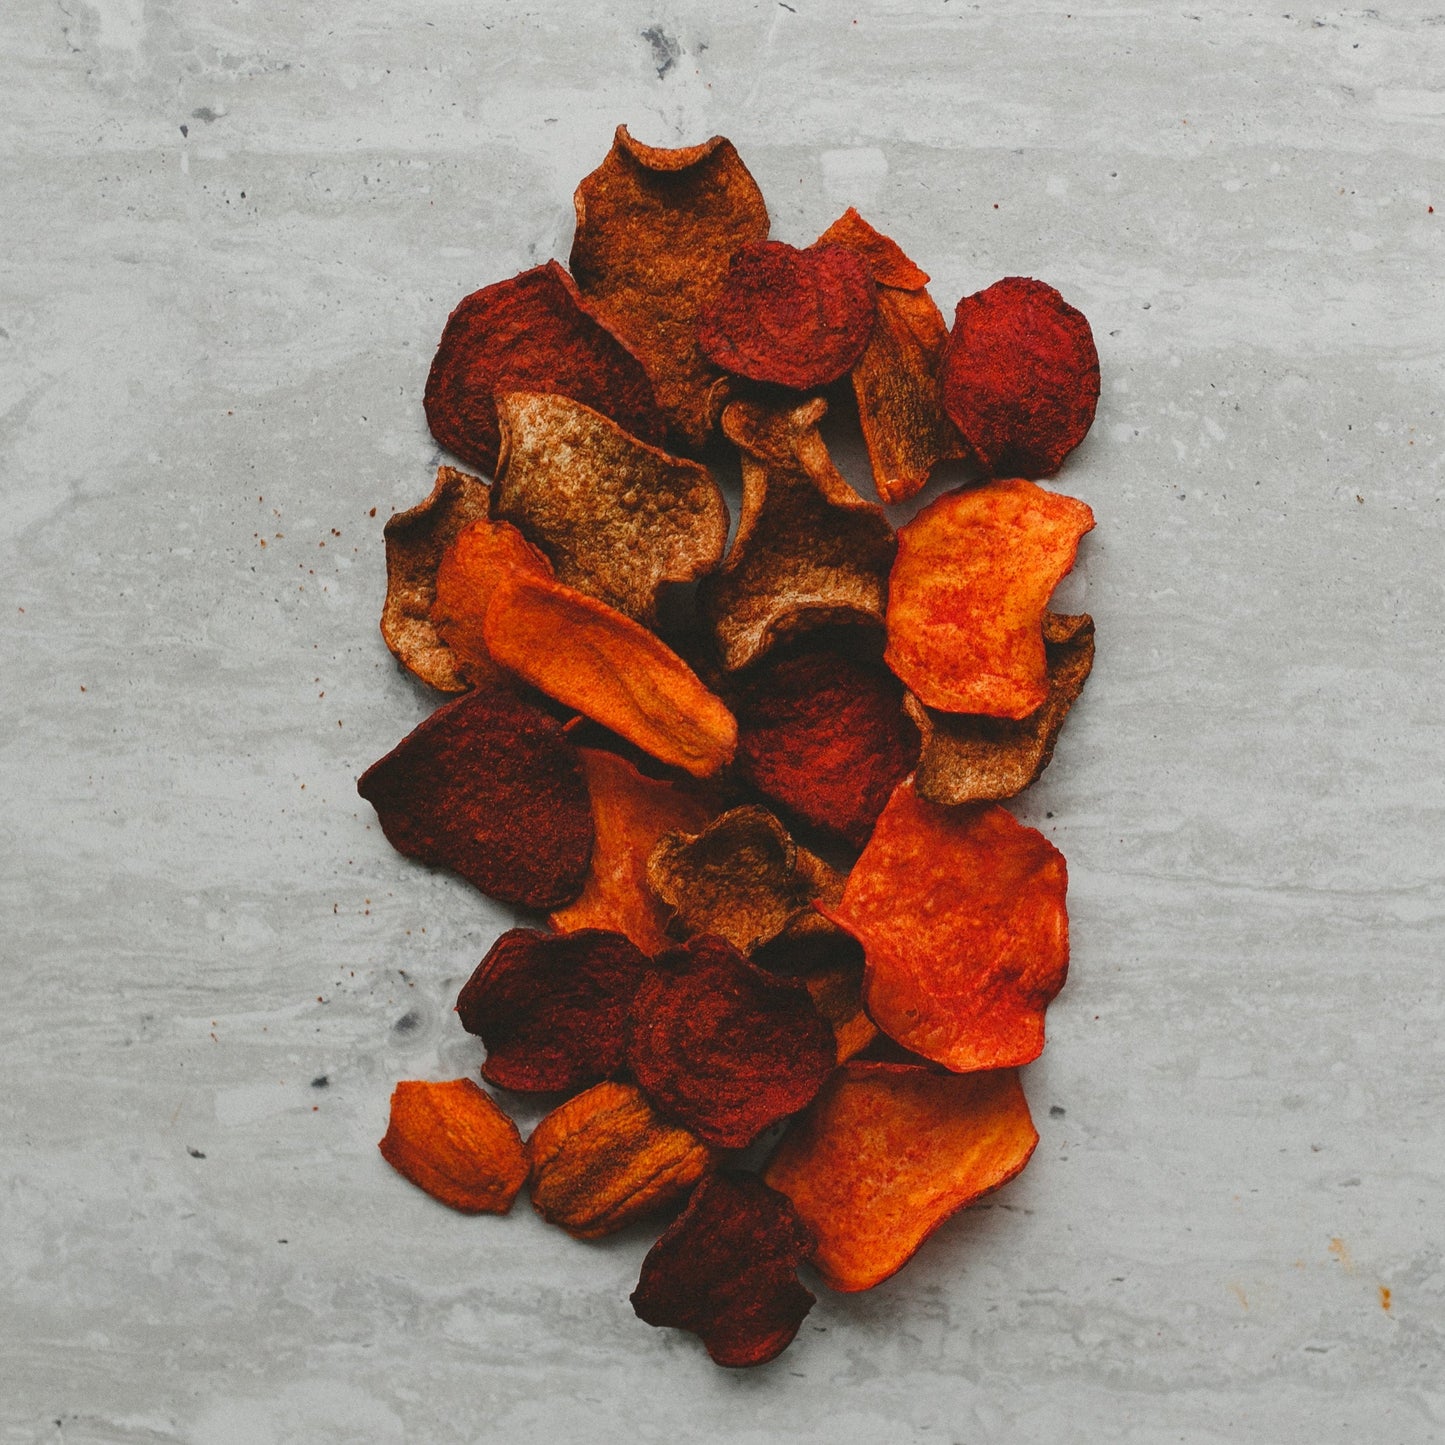 Dried Beets with Chili Powder